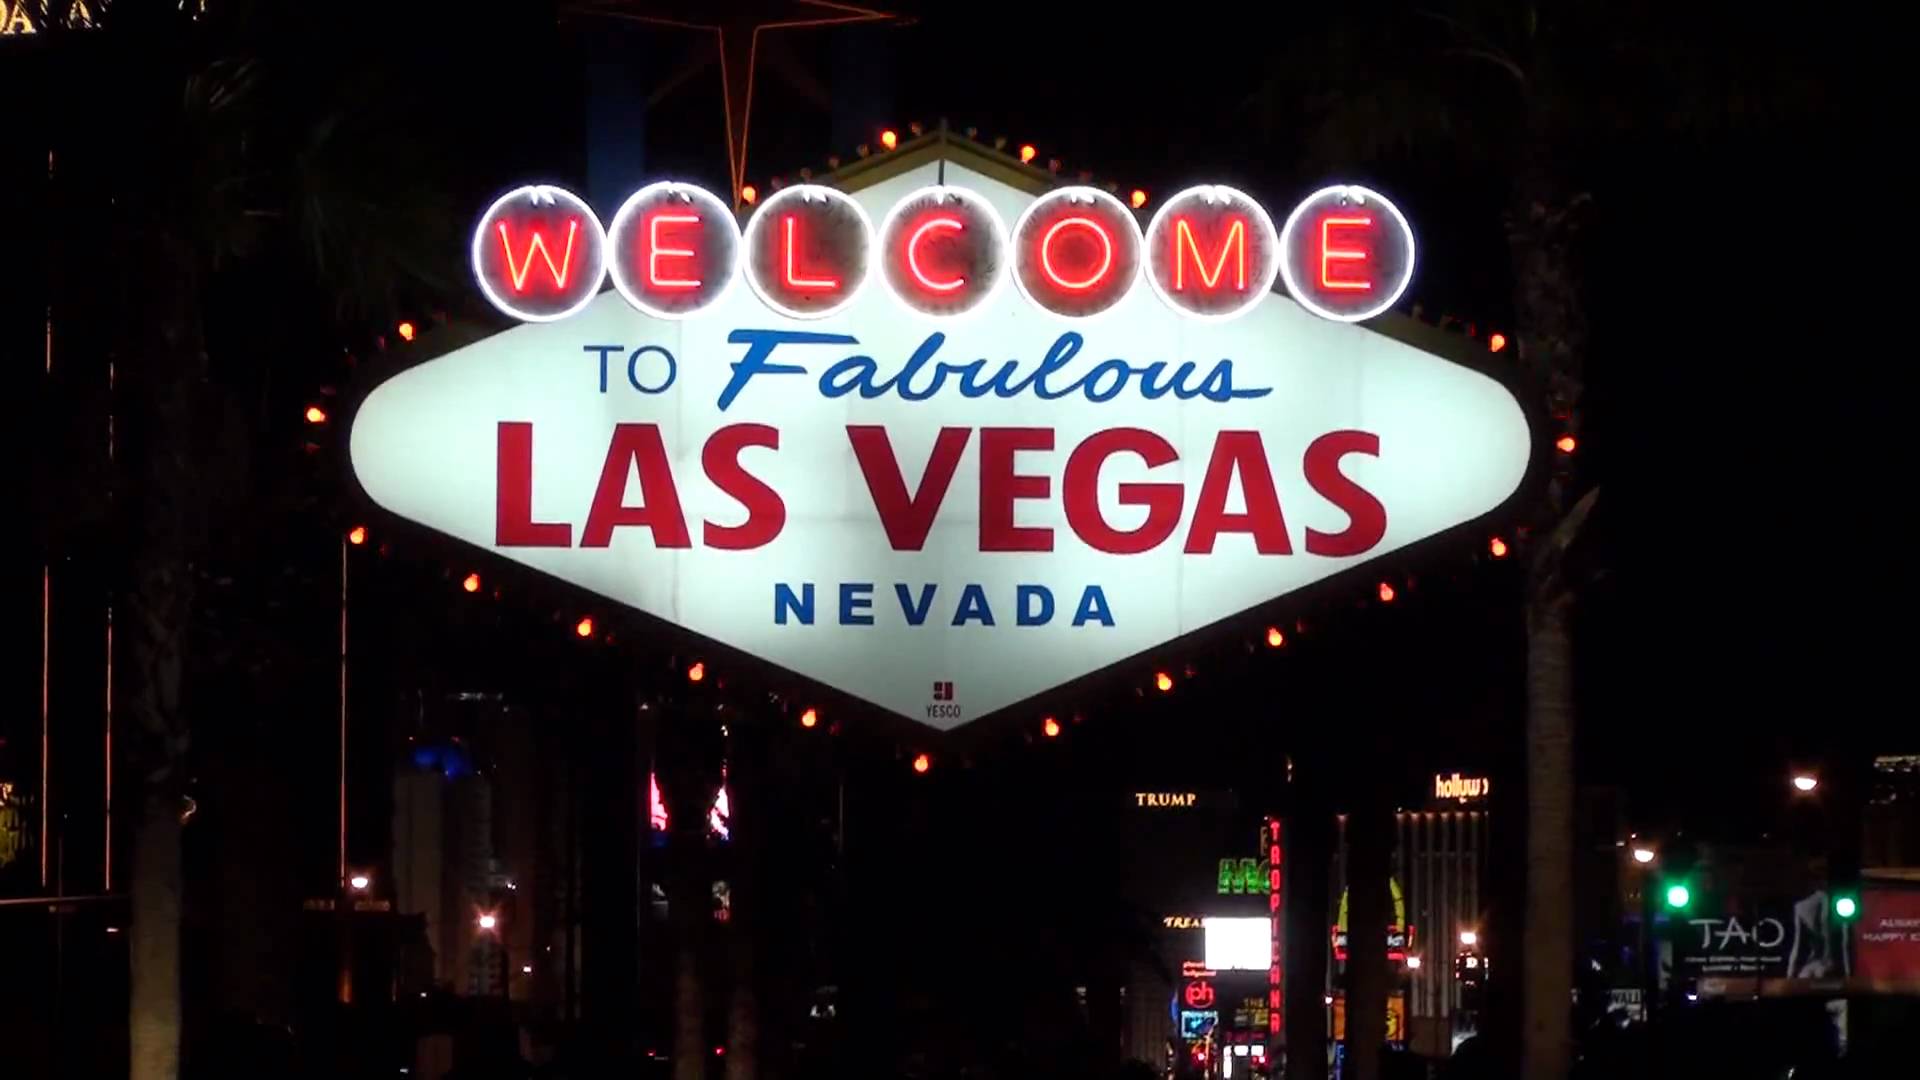 Las Vegas - Welcome to Las Vegas Sign by Night - YouTube